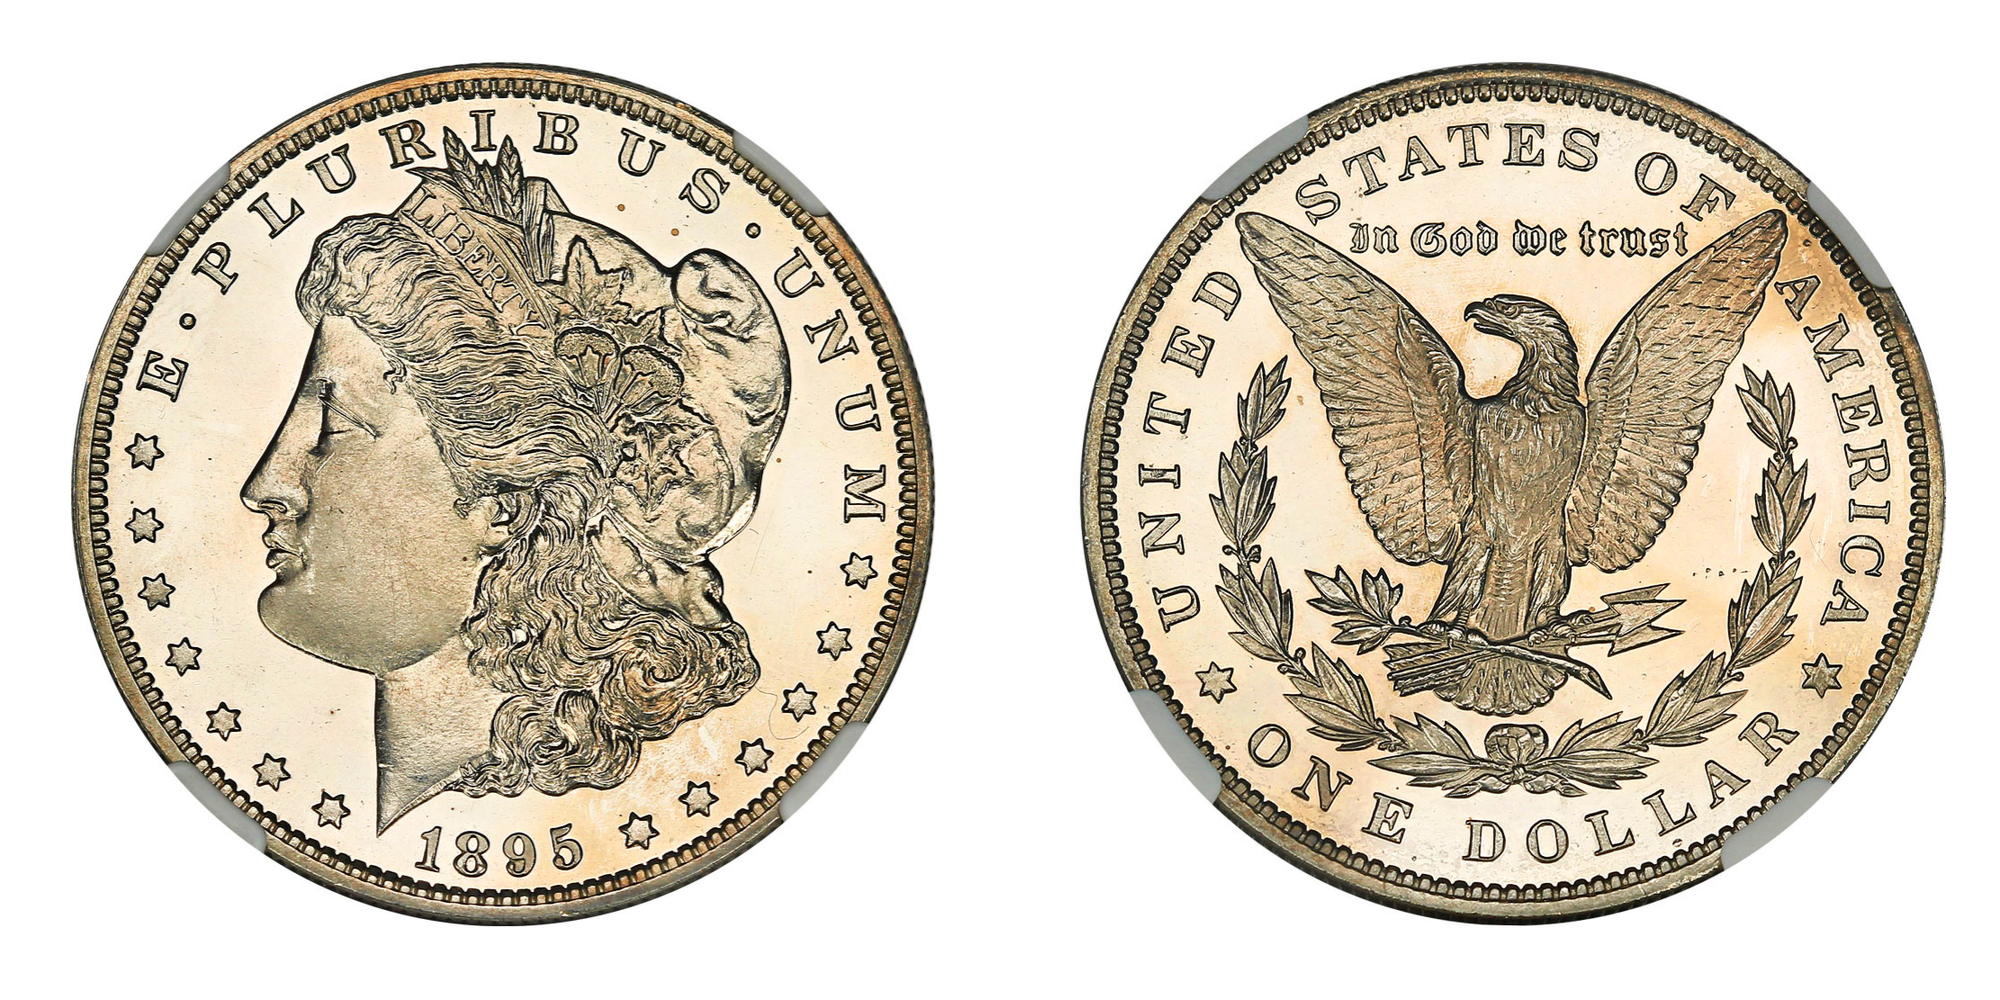 Coins We Love: A Return to Normalcy